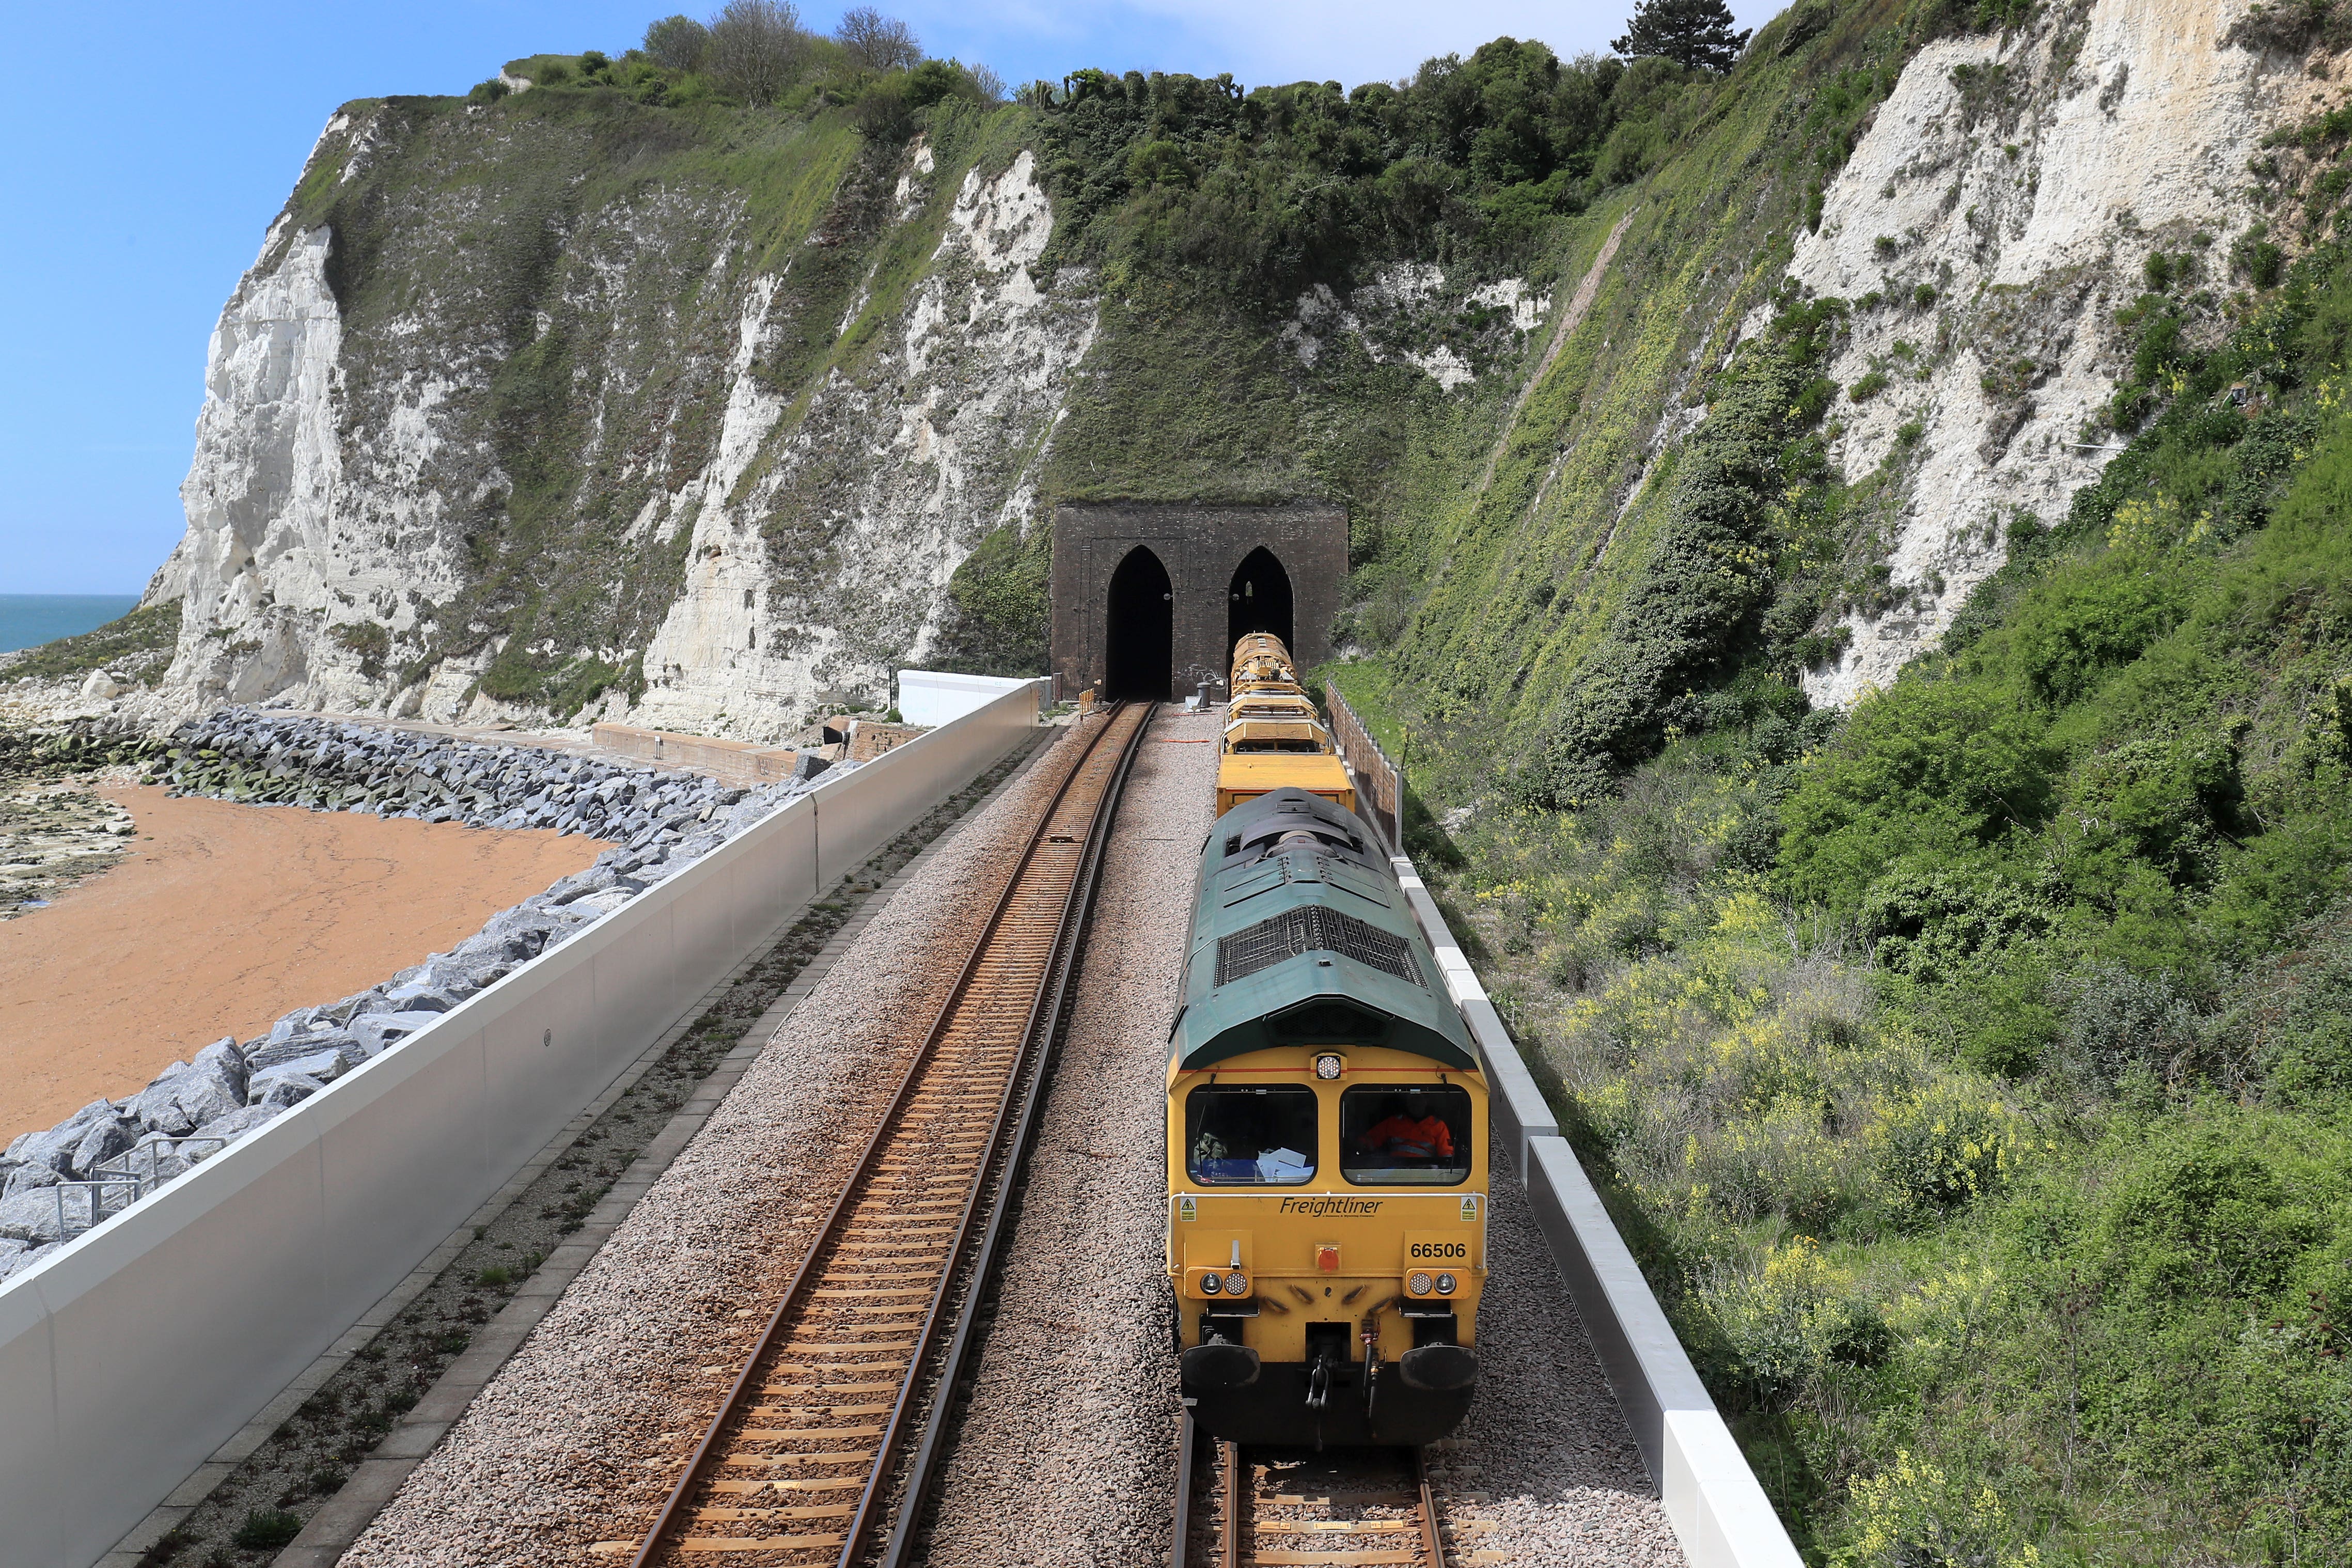 One freight train can replace up to 129 lorries, according to the Department for Transport (Gareth Fuller/PA)